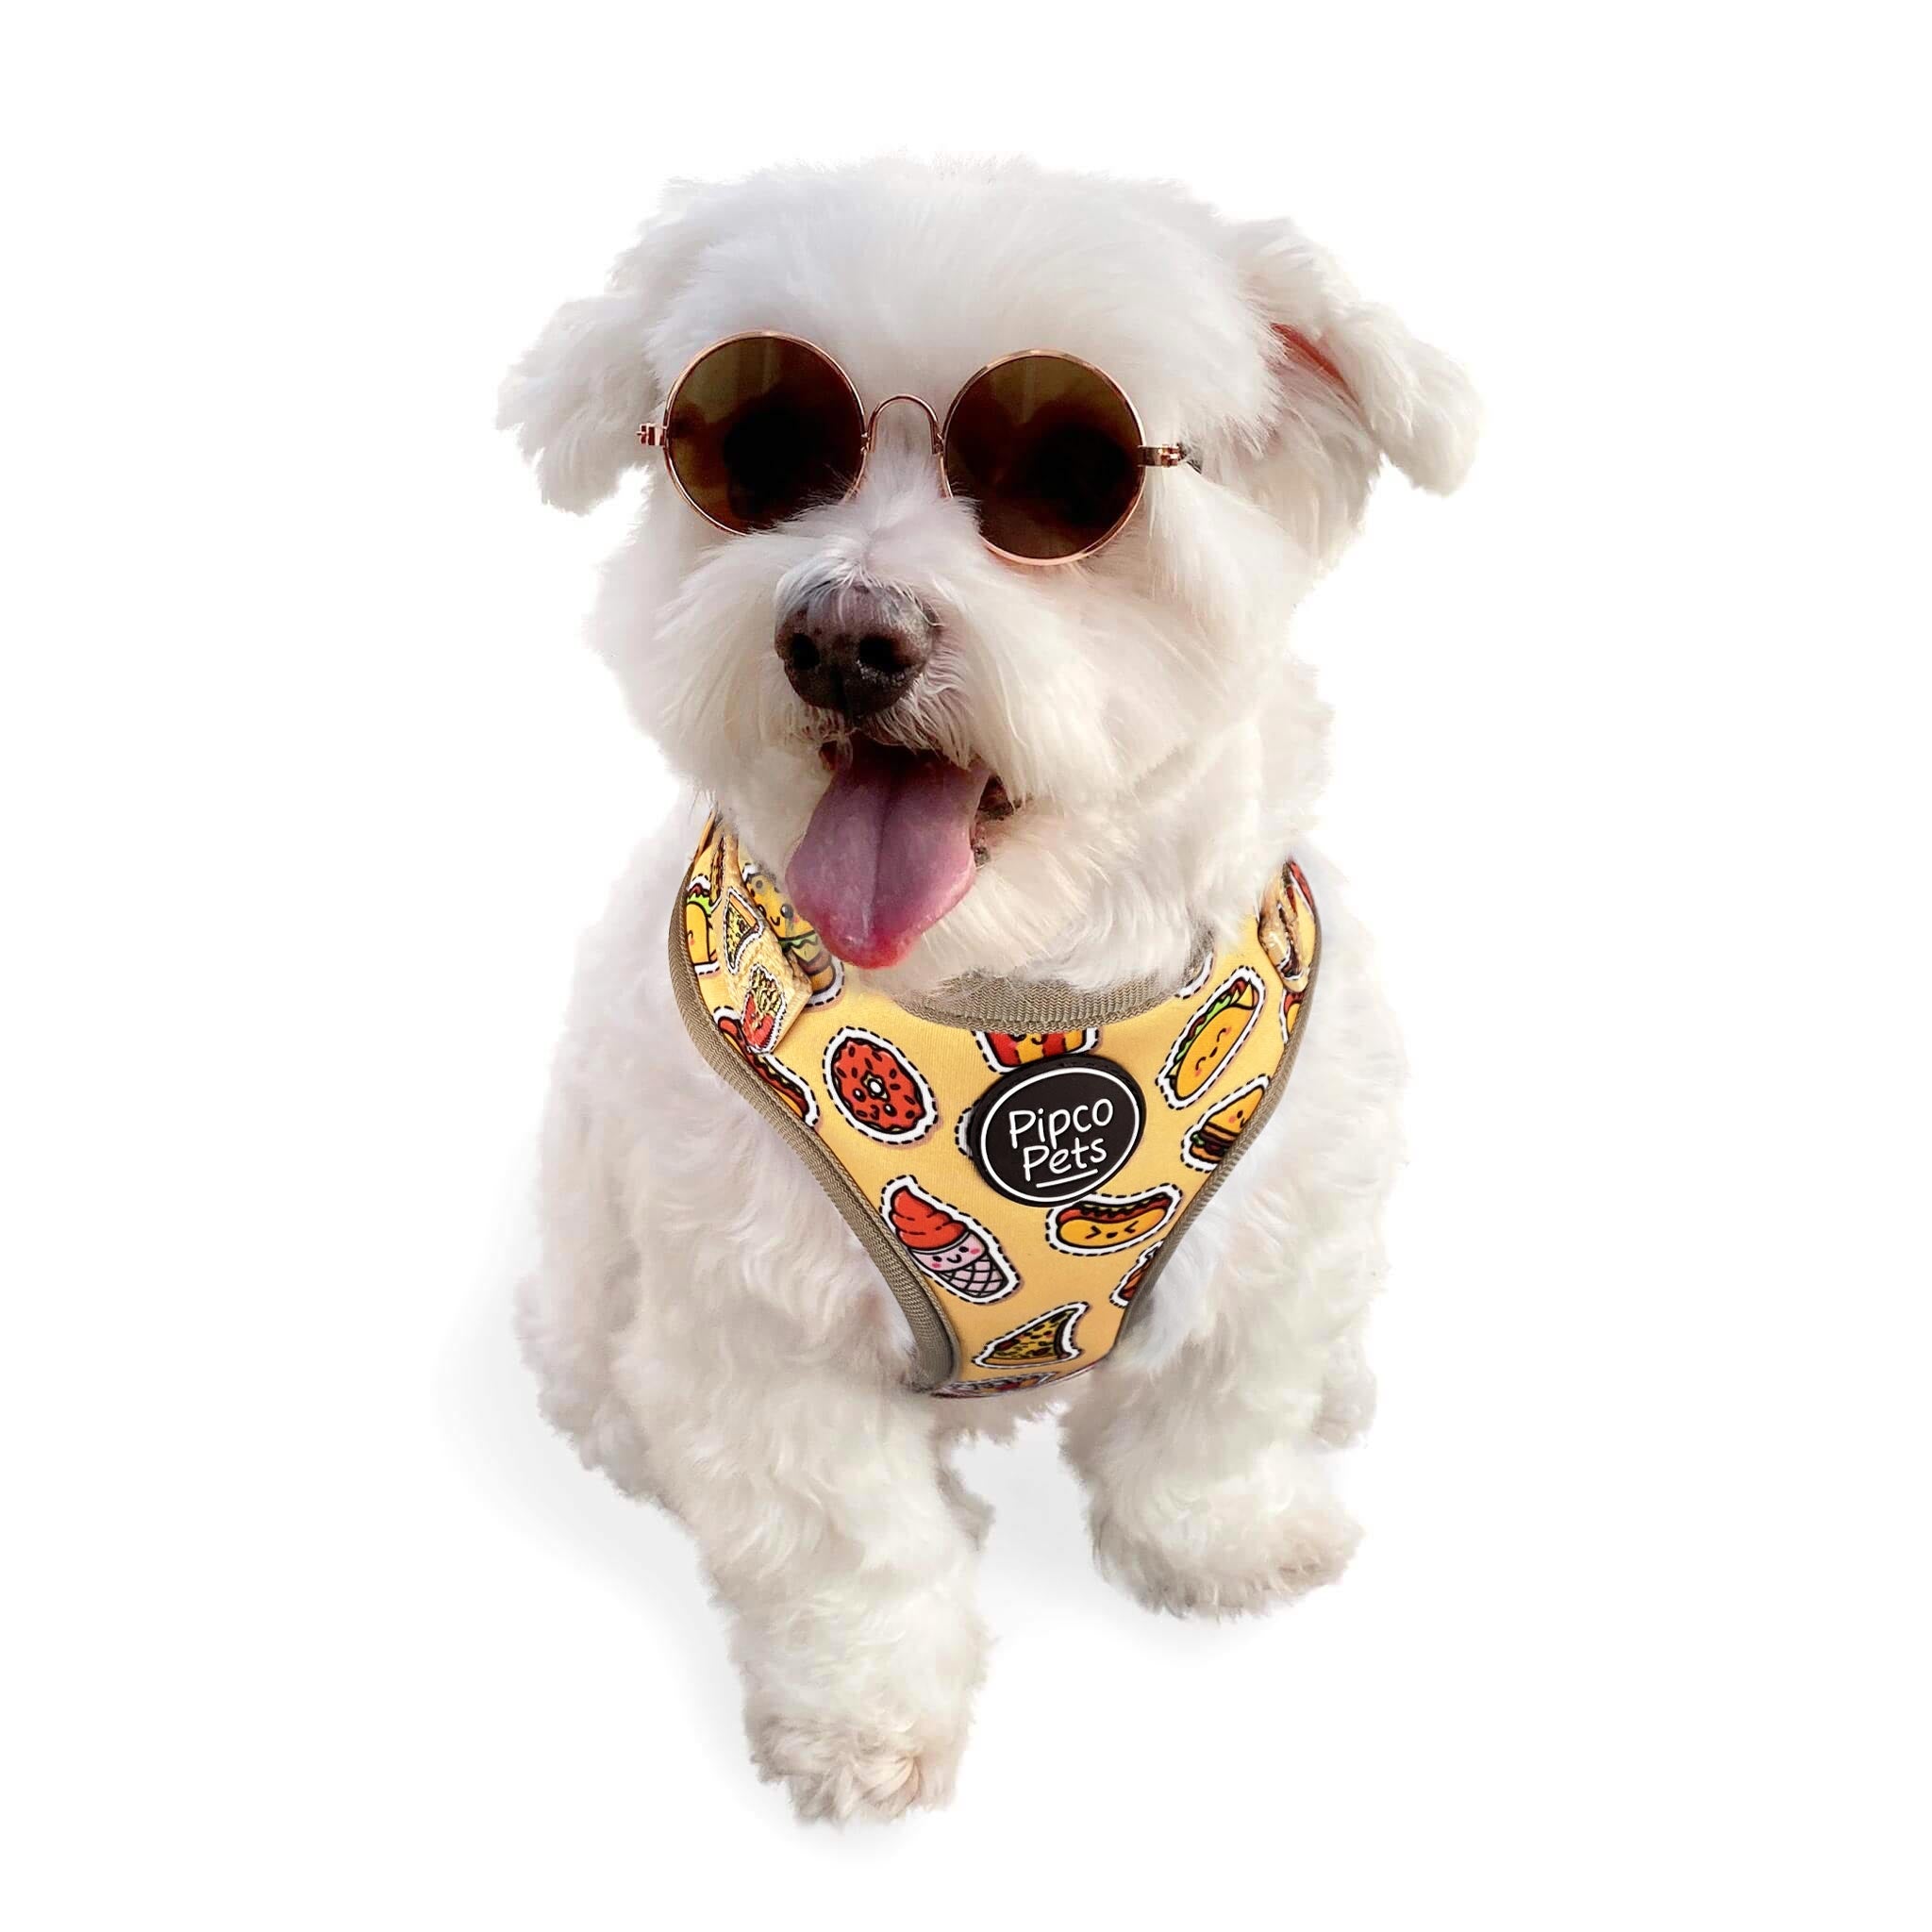 Cute dog wearing sunglasses and Pipco Pets adjustable harness with Snack Pack junk food print pattern in yellow